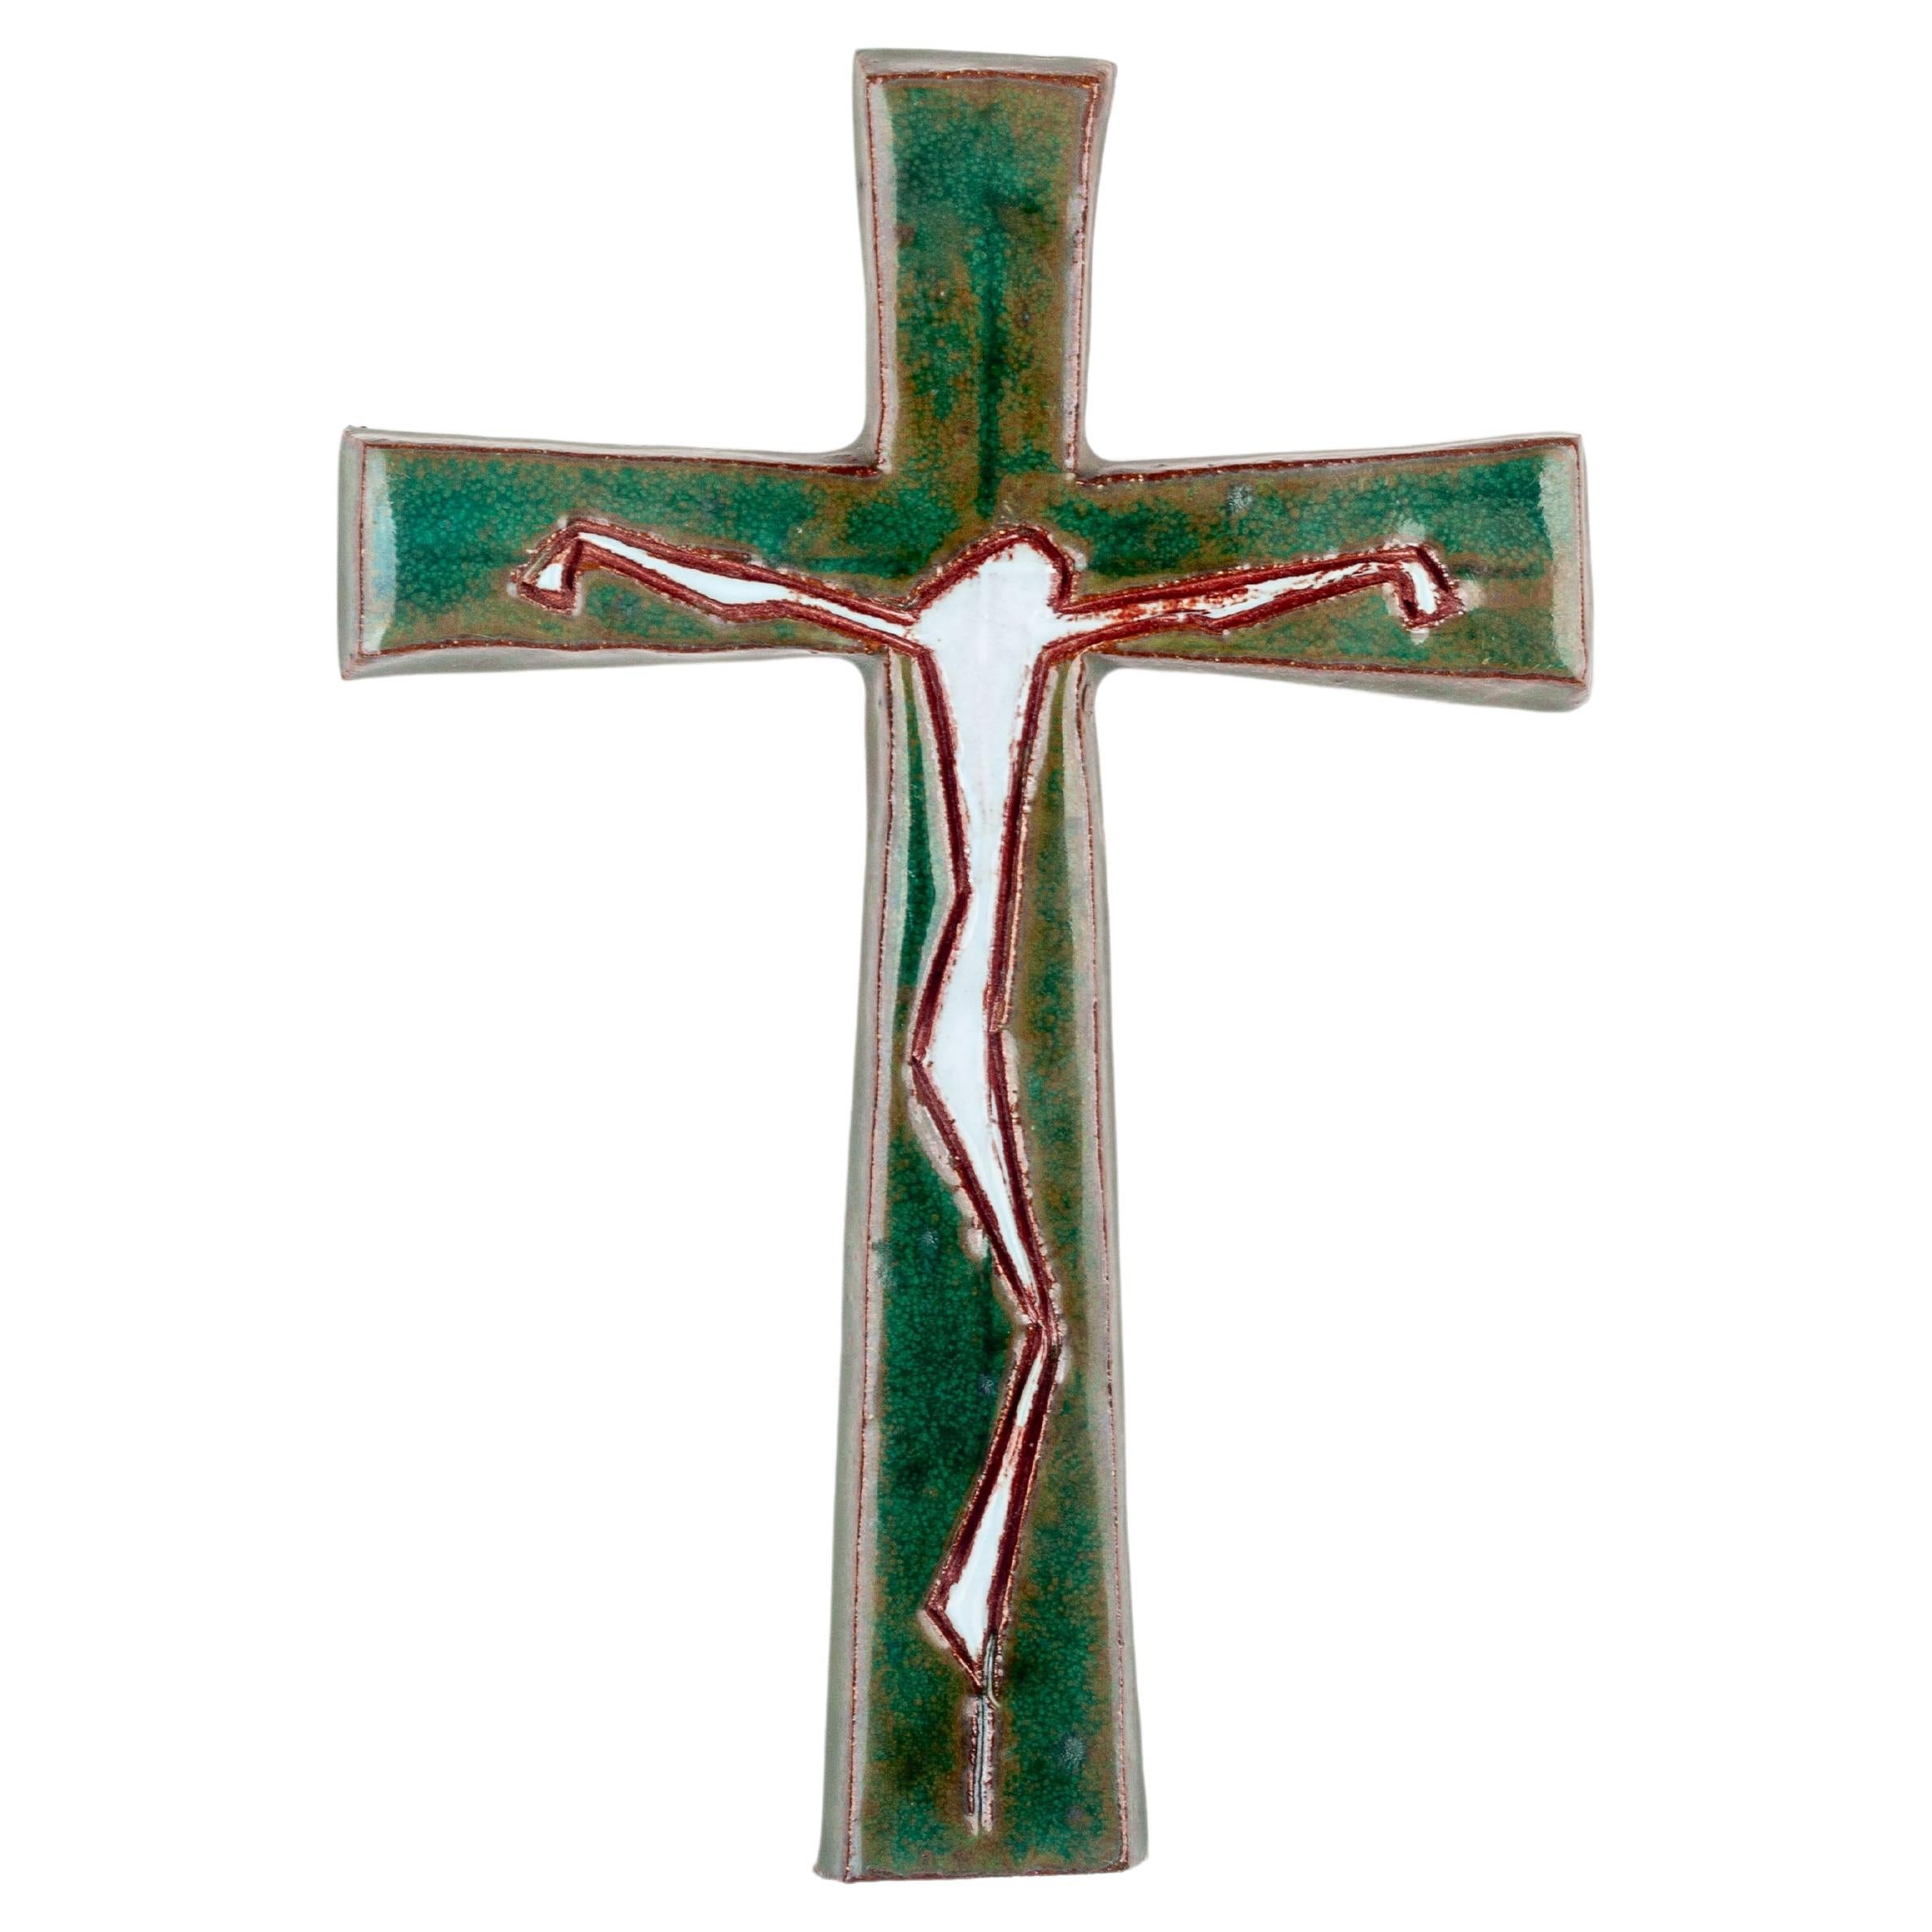  Ceramic Mid-century Abstract Crucifixion, Studio Pottery, Handmade in Europe For Sale